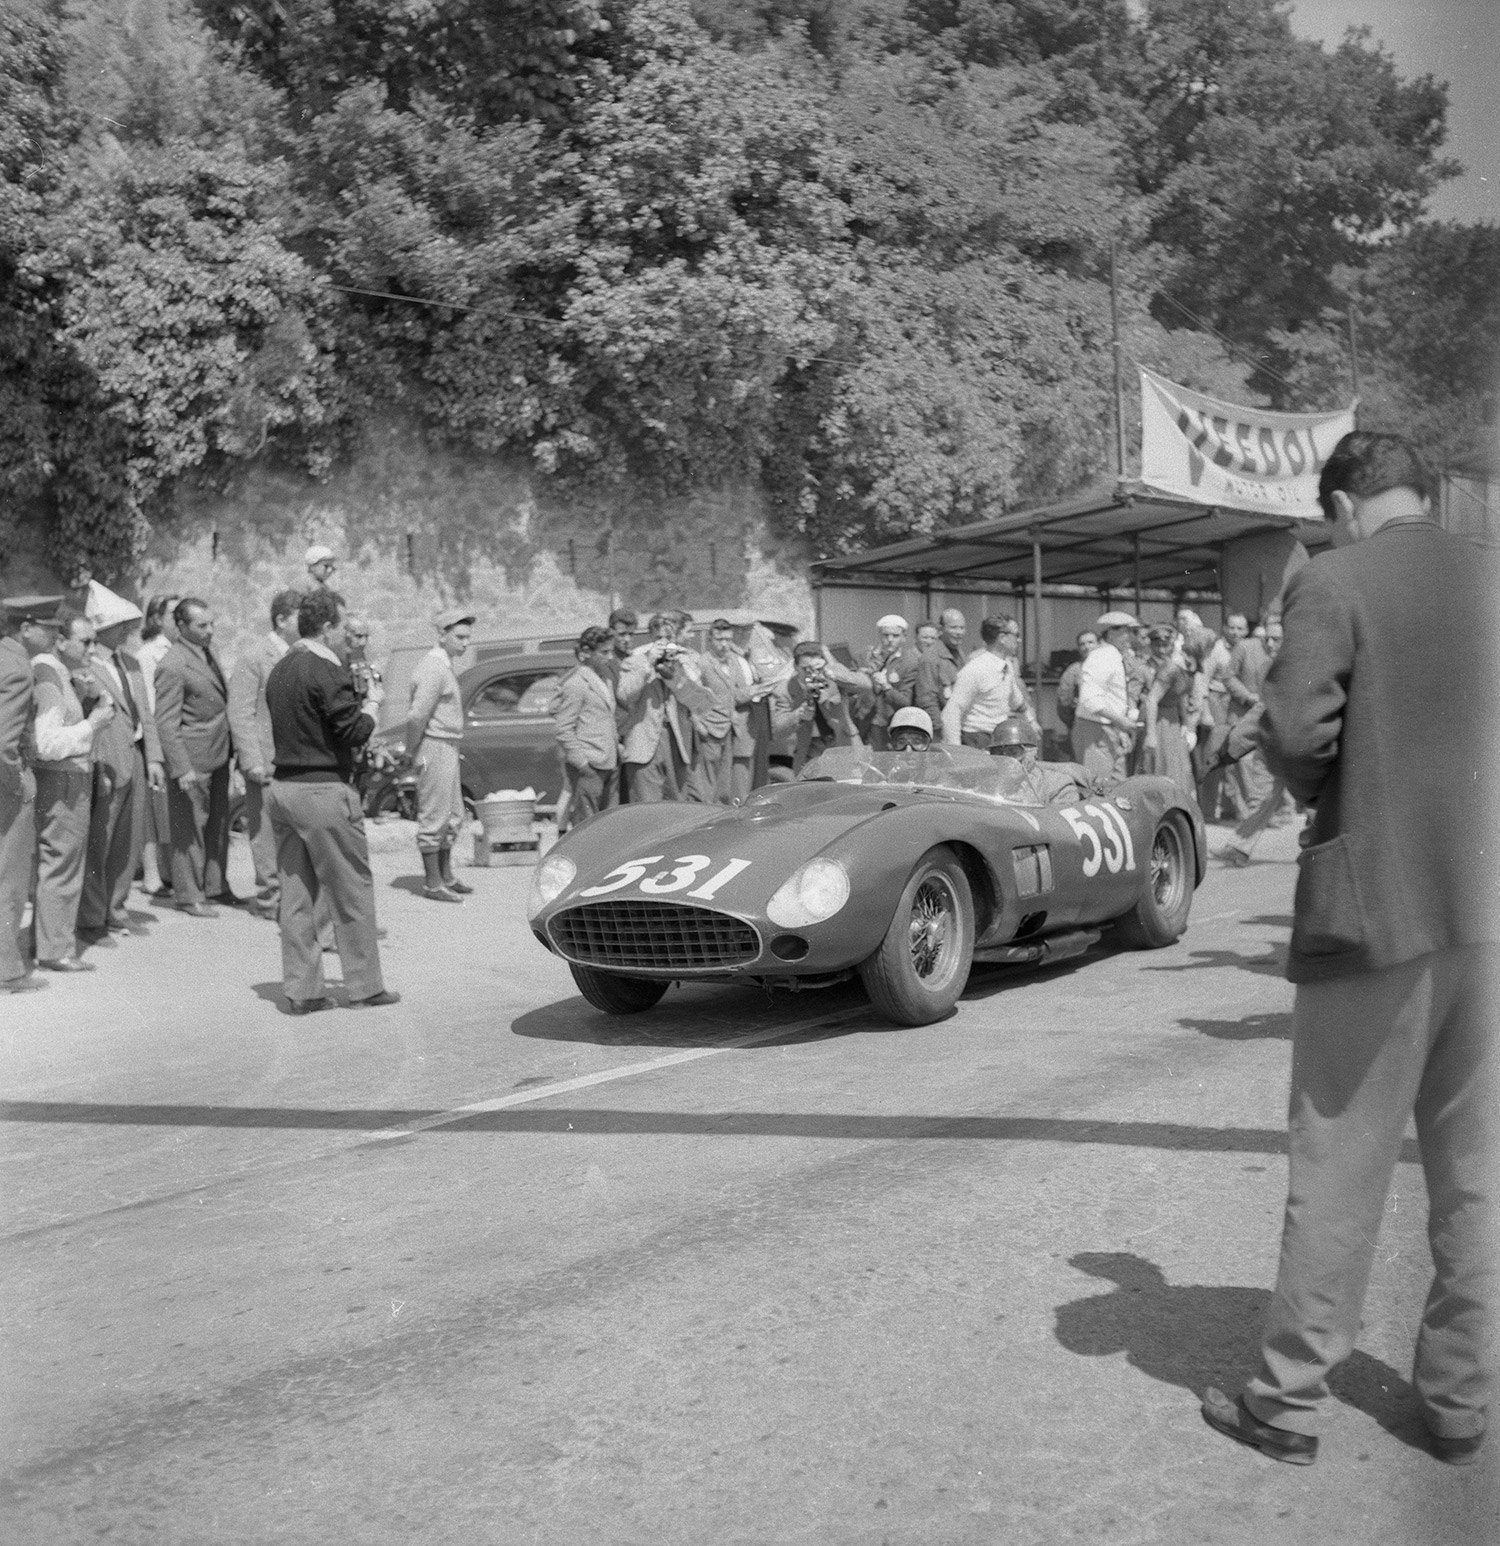 Spanish racing driver and sportsman Marquis Alfonso De Portago and co-driver Eddy Nelson during the Mille Miglia on May 12, 1957.